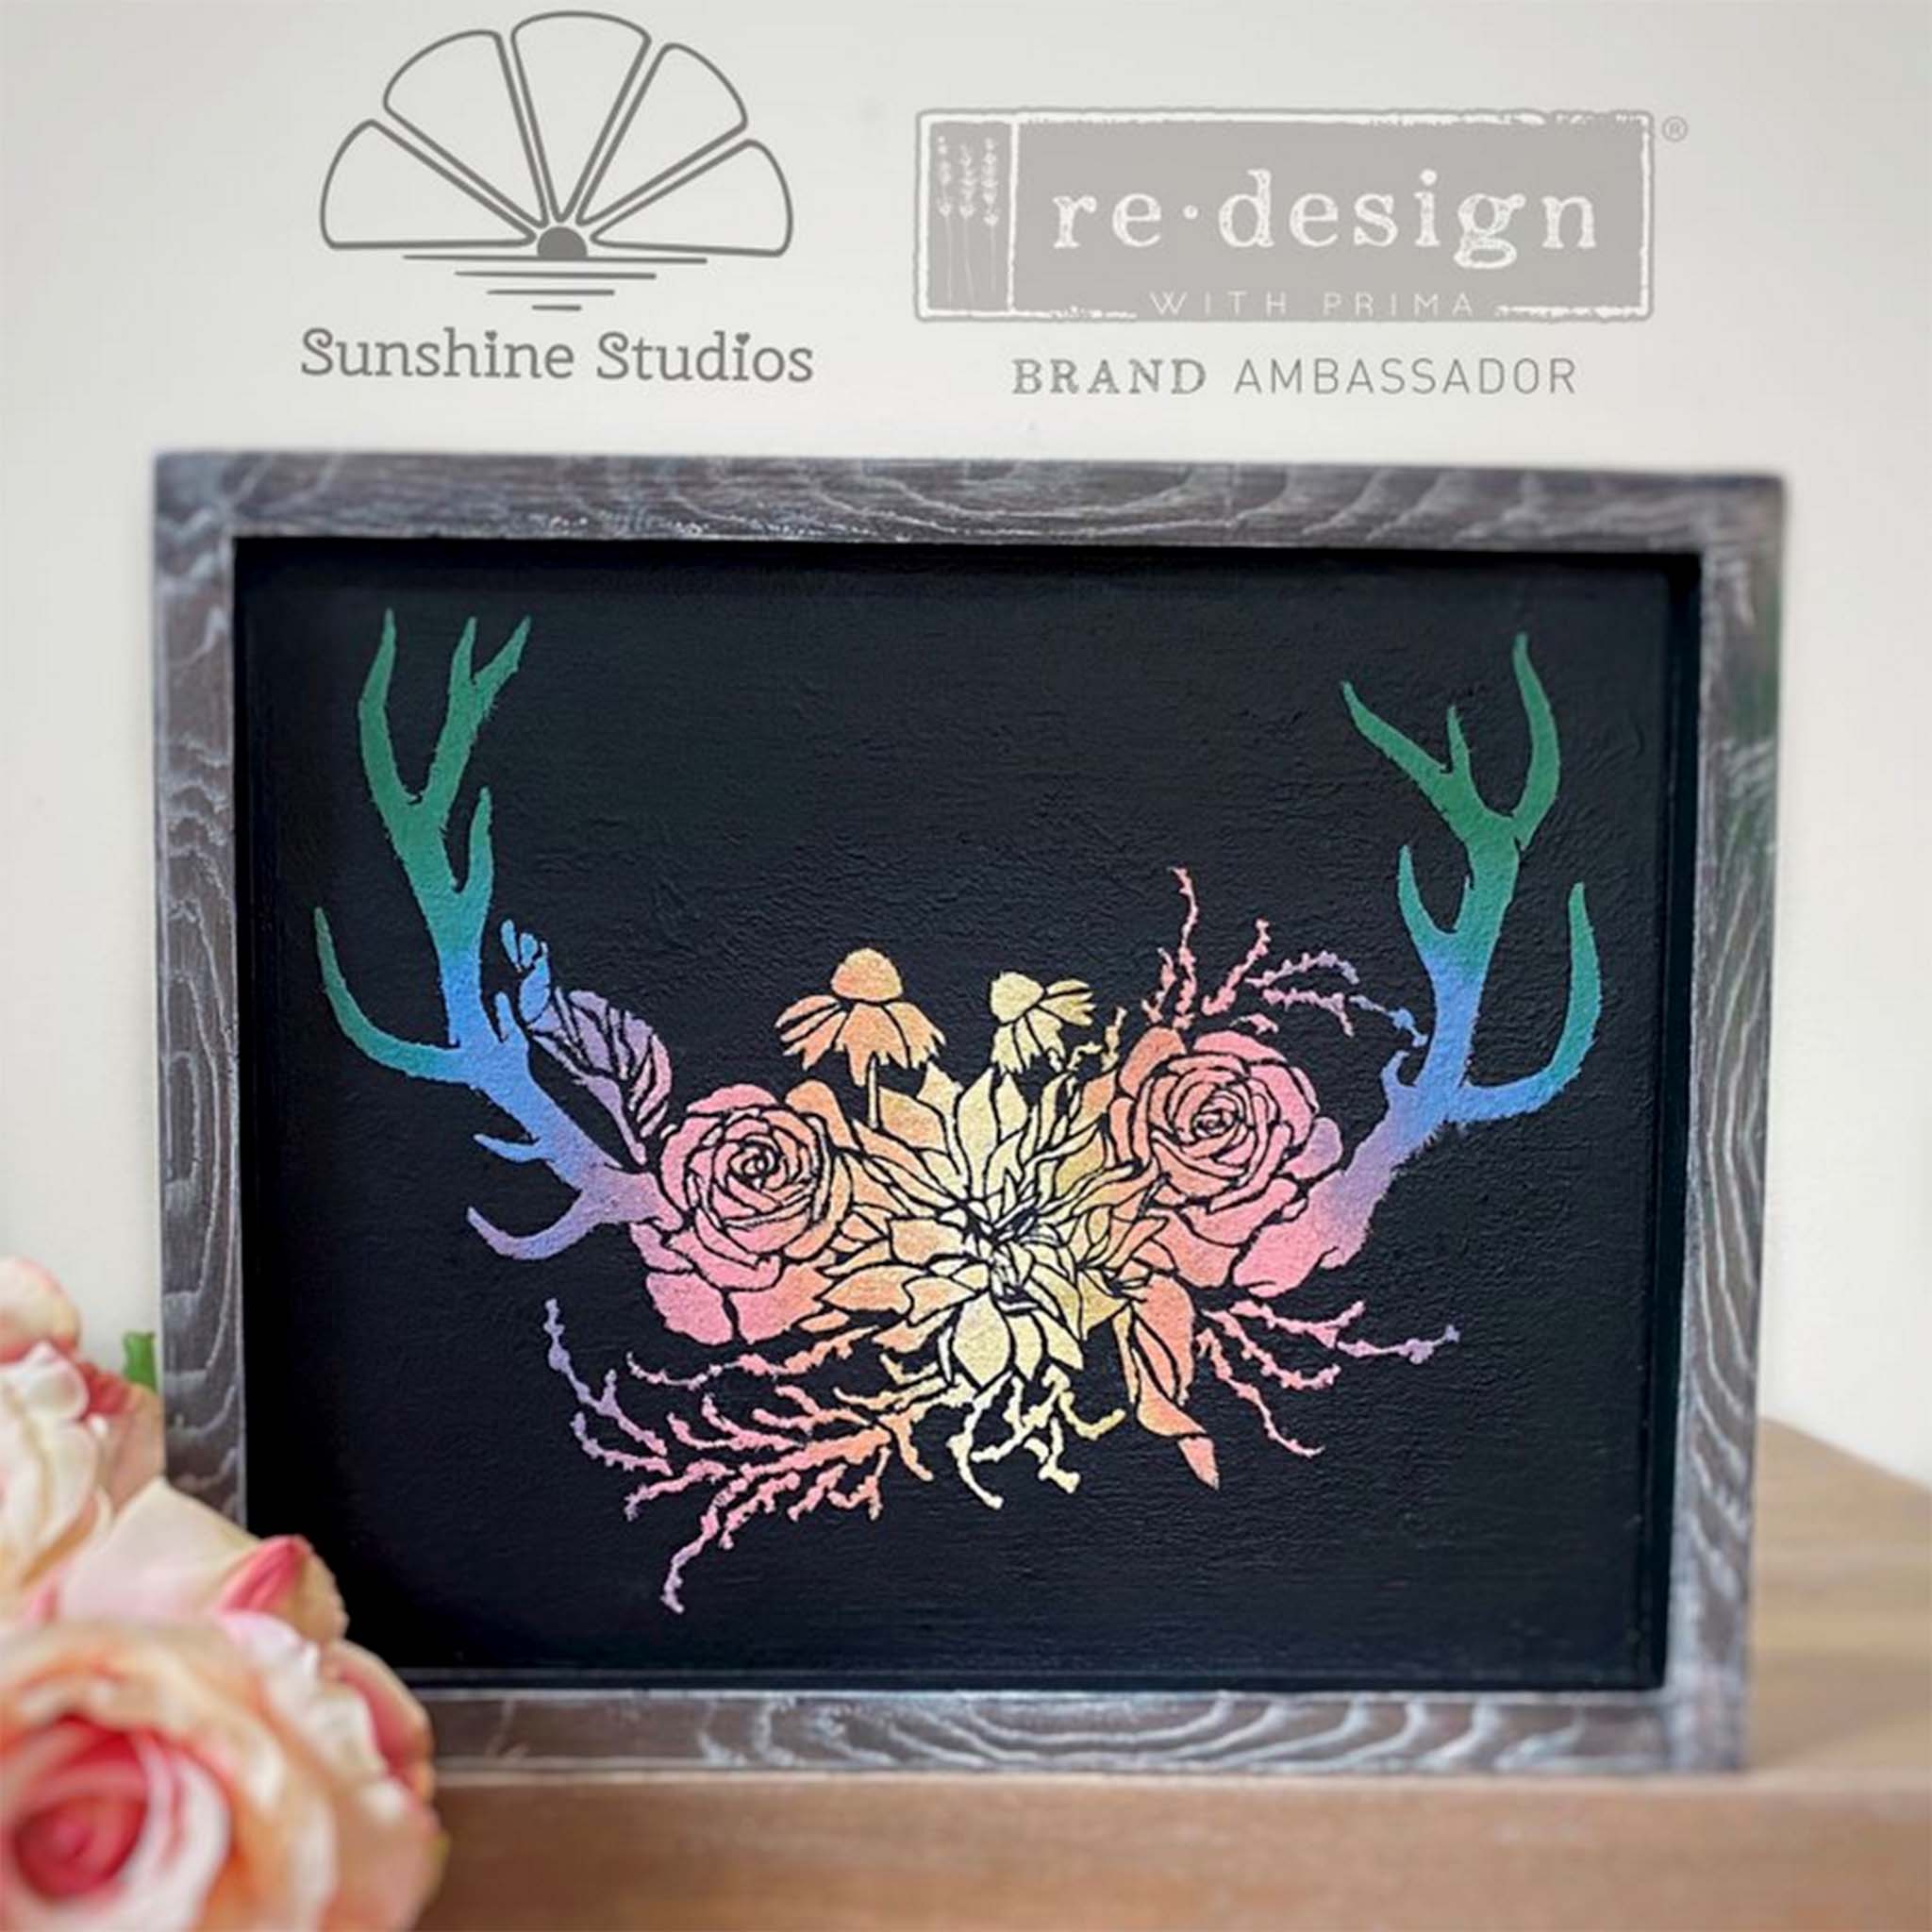 A wood photo frame refurbished by Sunshine Studios is gray washed on the frame and black inside the frame. Against the black is amn ombre pastel colorful blend of ReDesign with Prima's Wildwood Cabin 3D stencil design.